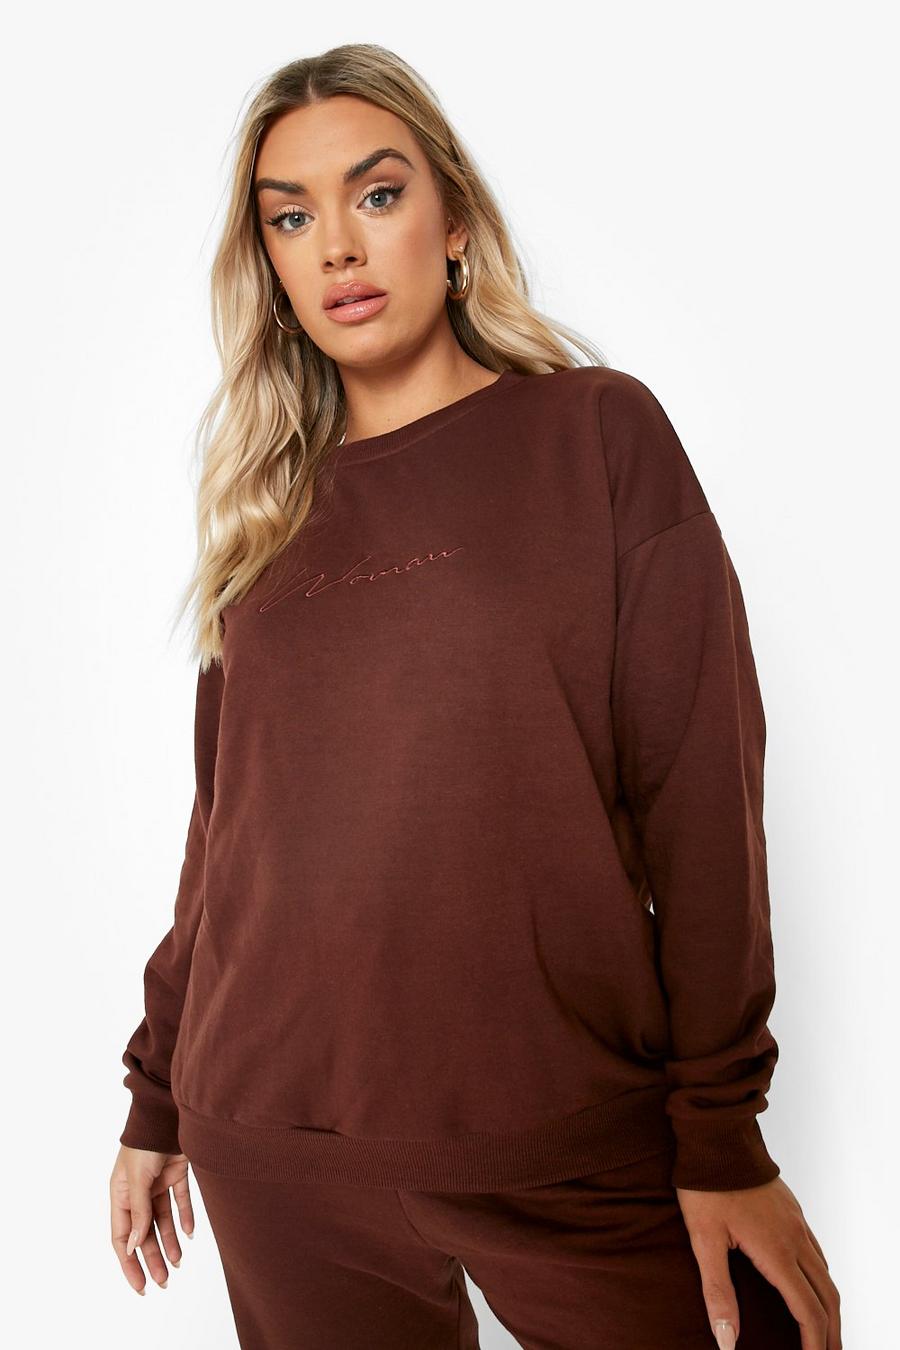 Chocolate brun Plus Woman Embroidered Sweater